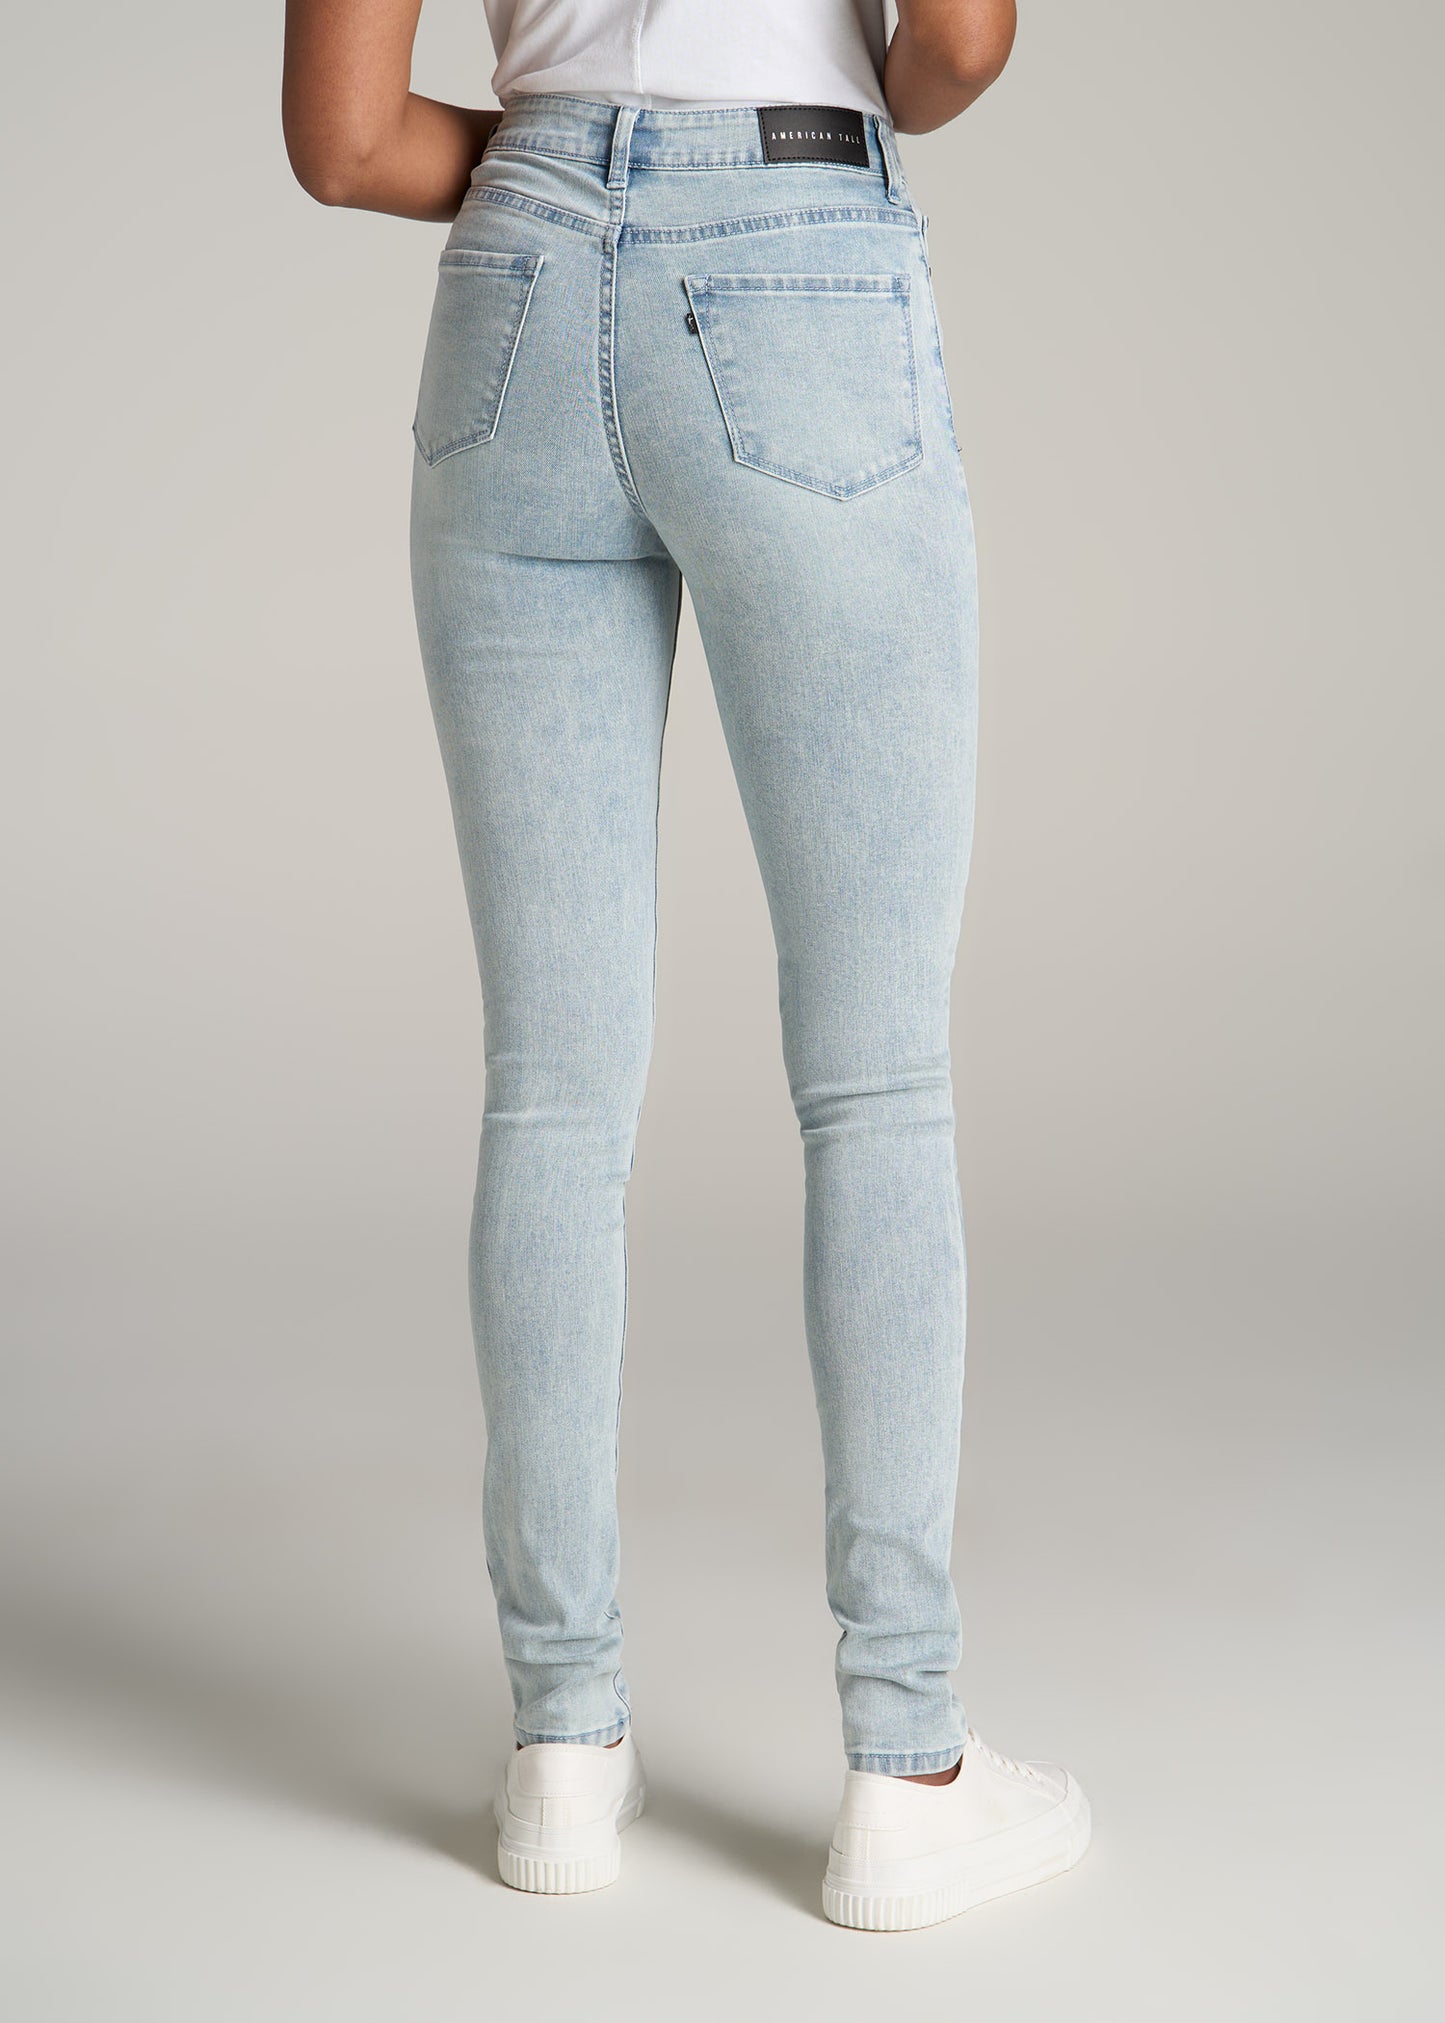 Georgia HIGH RISE SKINNY Tall Women's Jeans in Light Sunwashed Blue